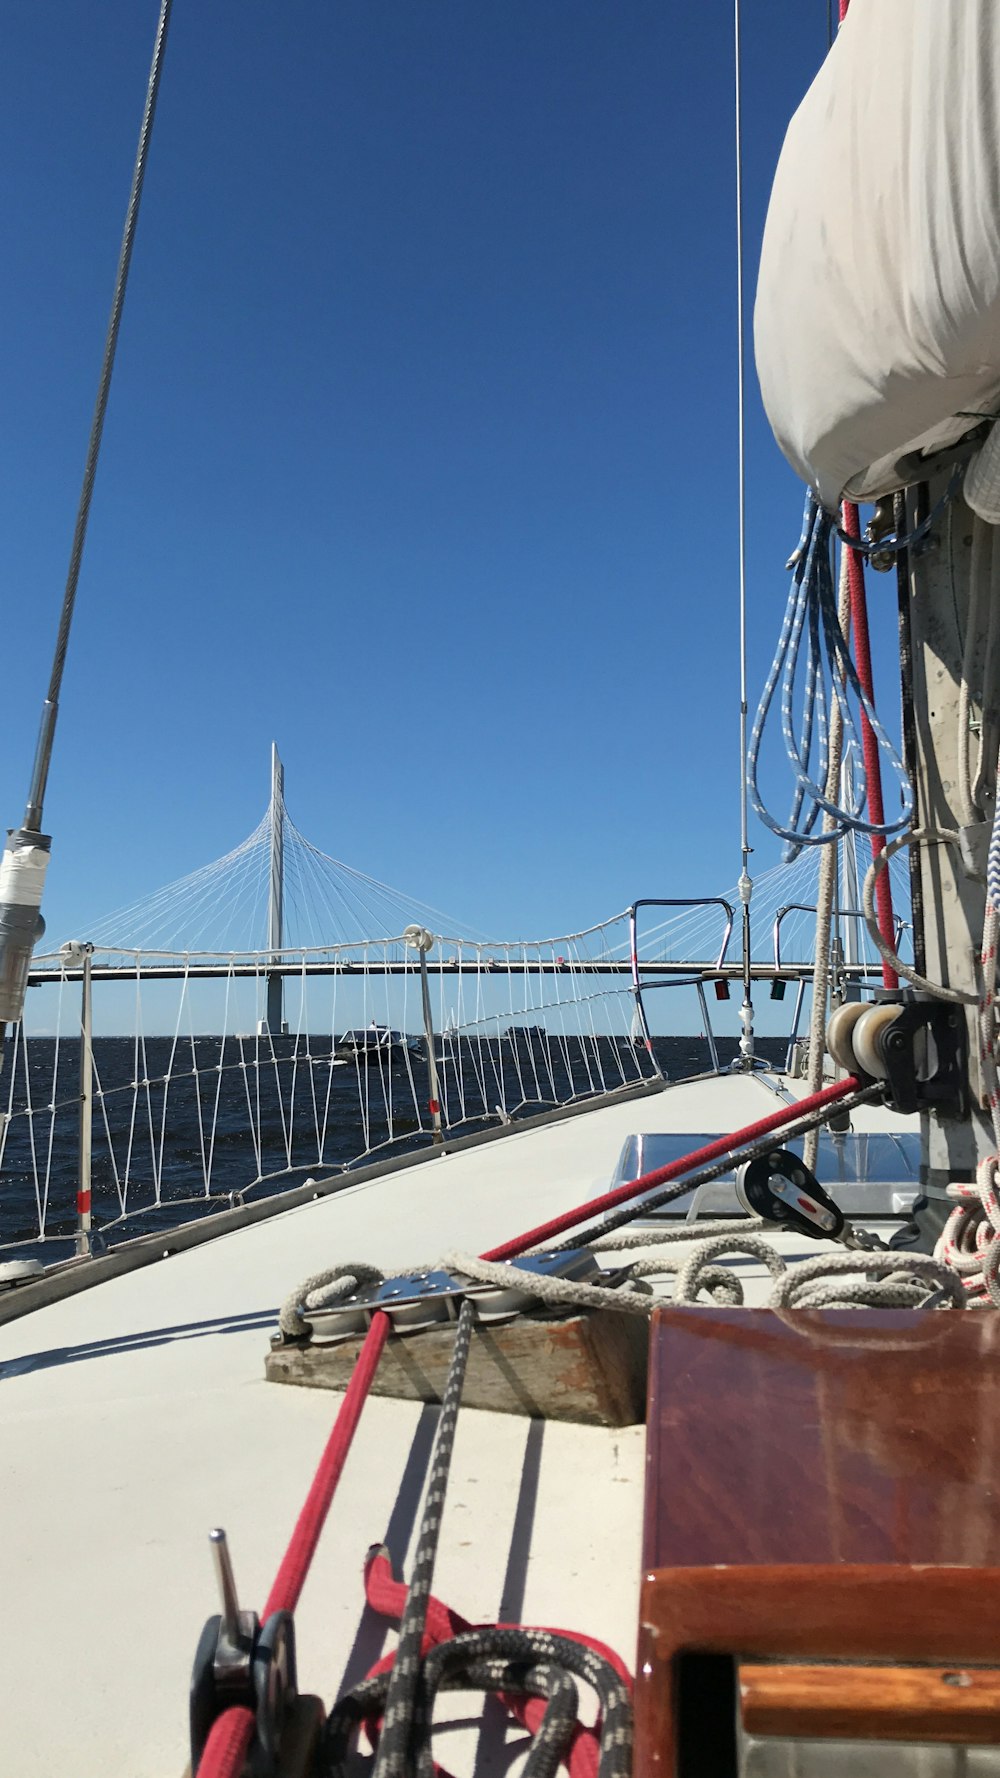 a view of a bridge from a boat on the water